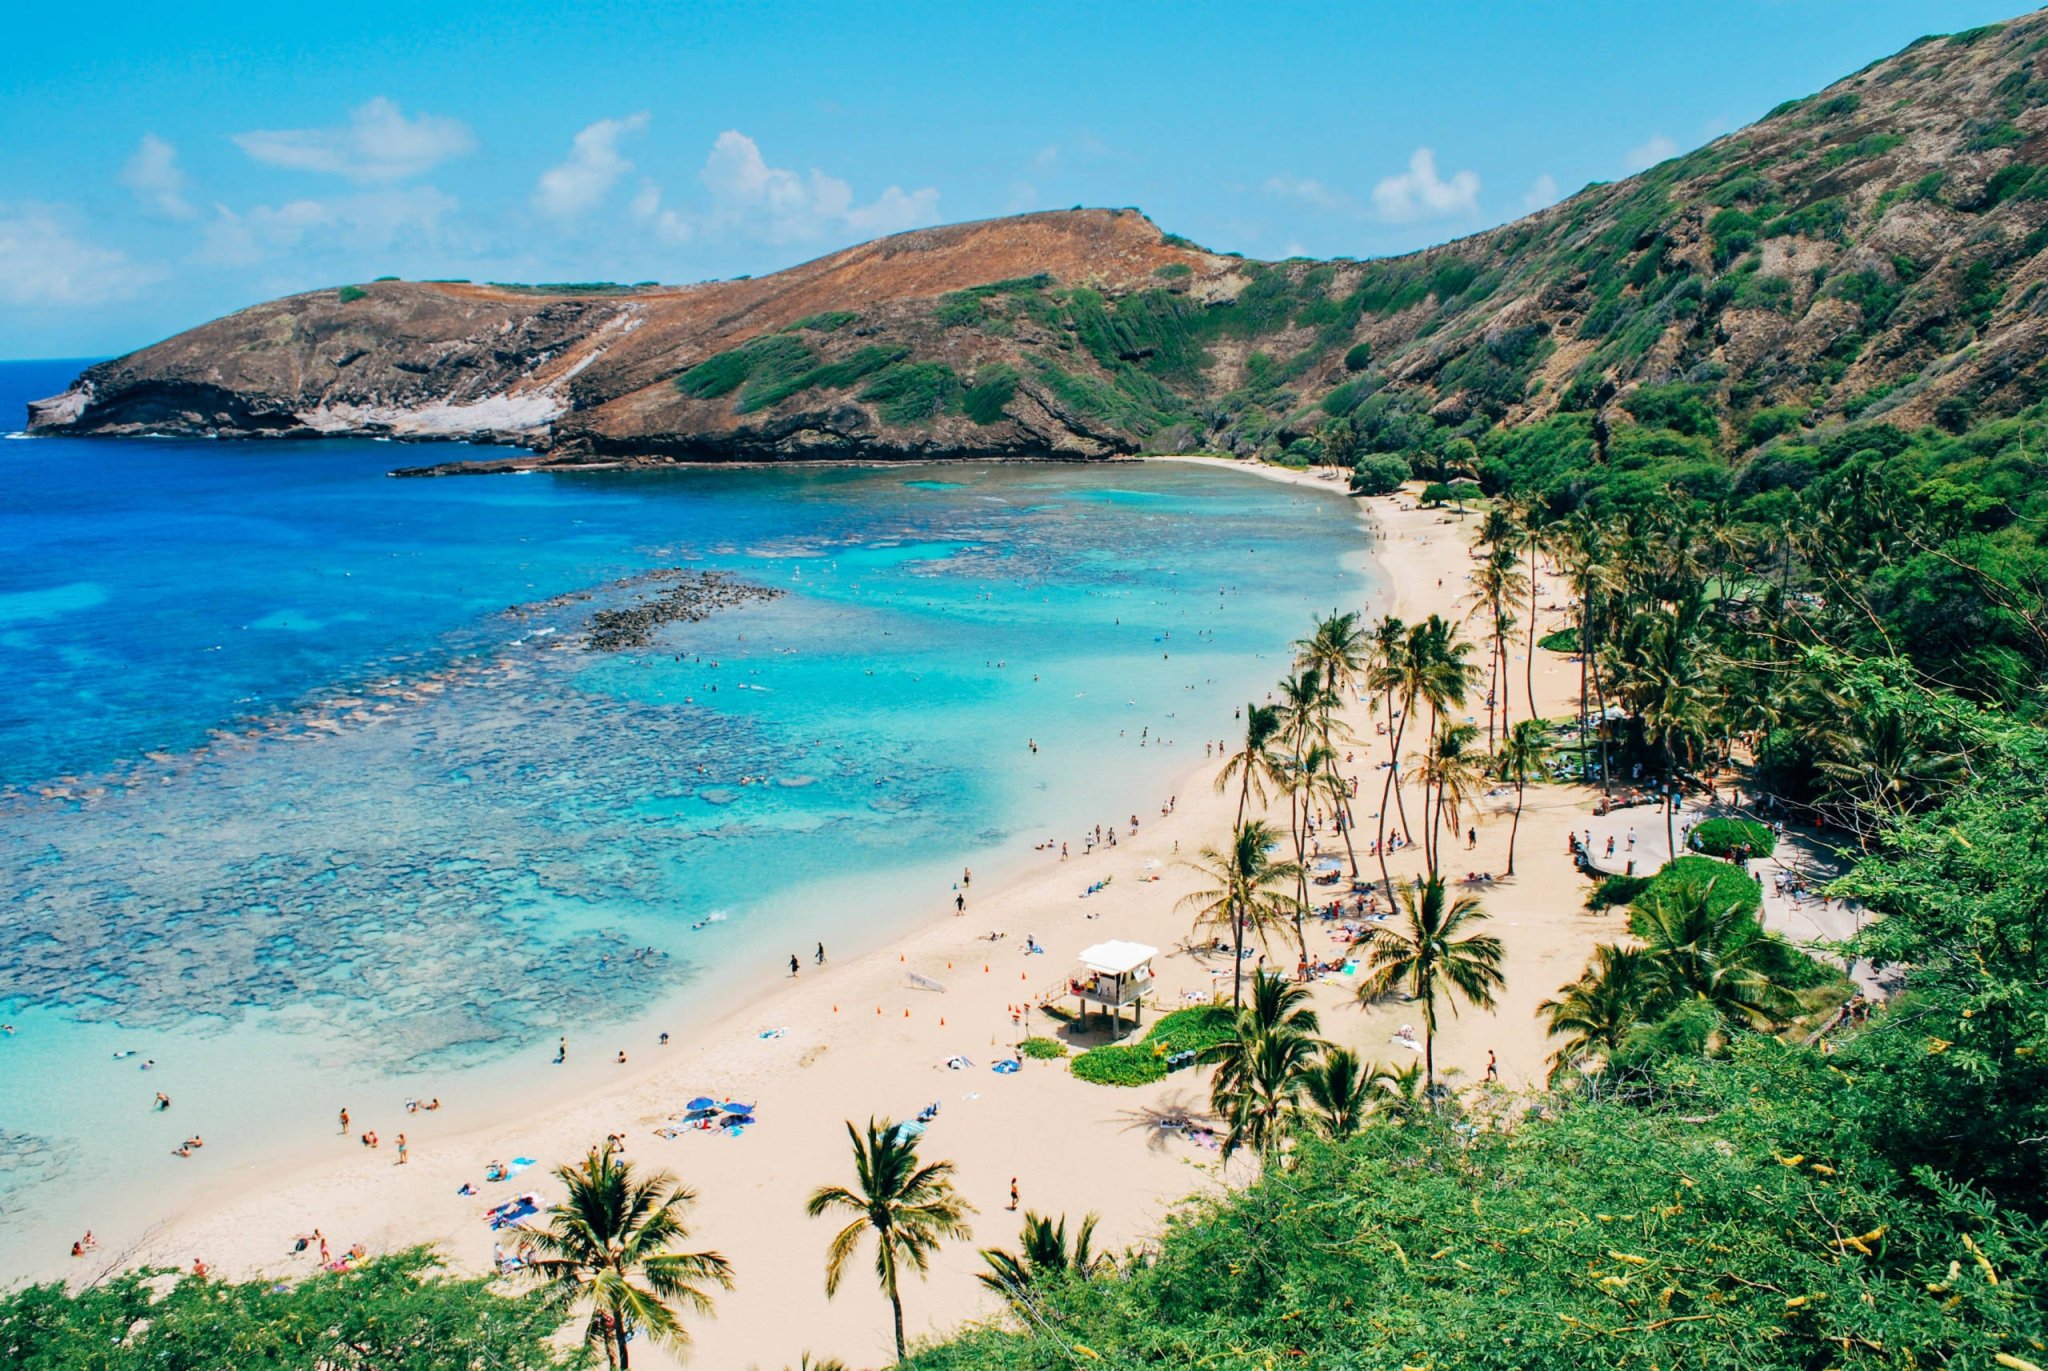 I just traveled to Hawaii: Here’s what it’s like for tourists right now